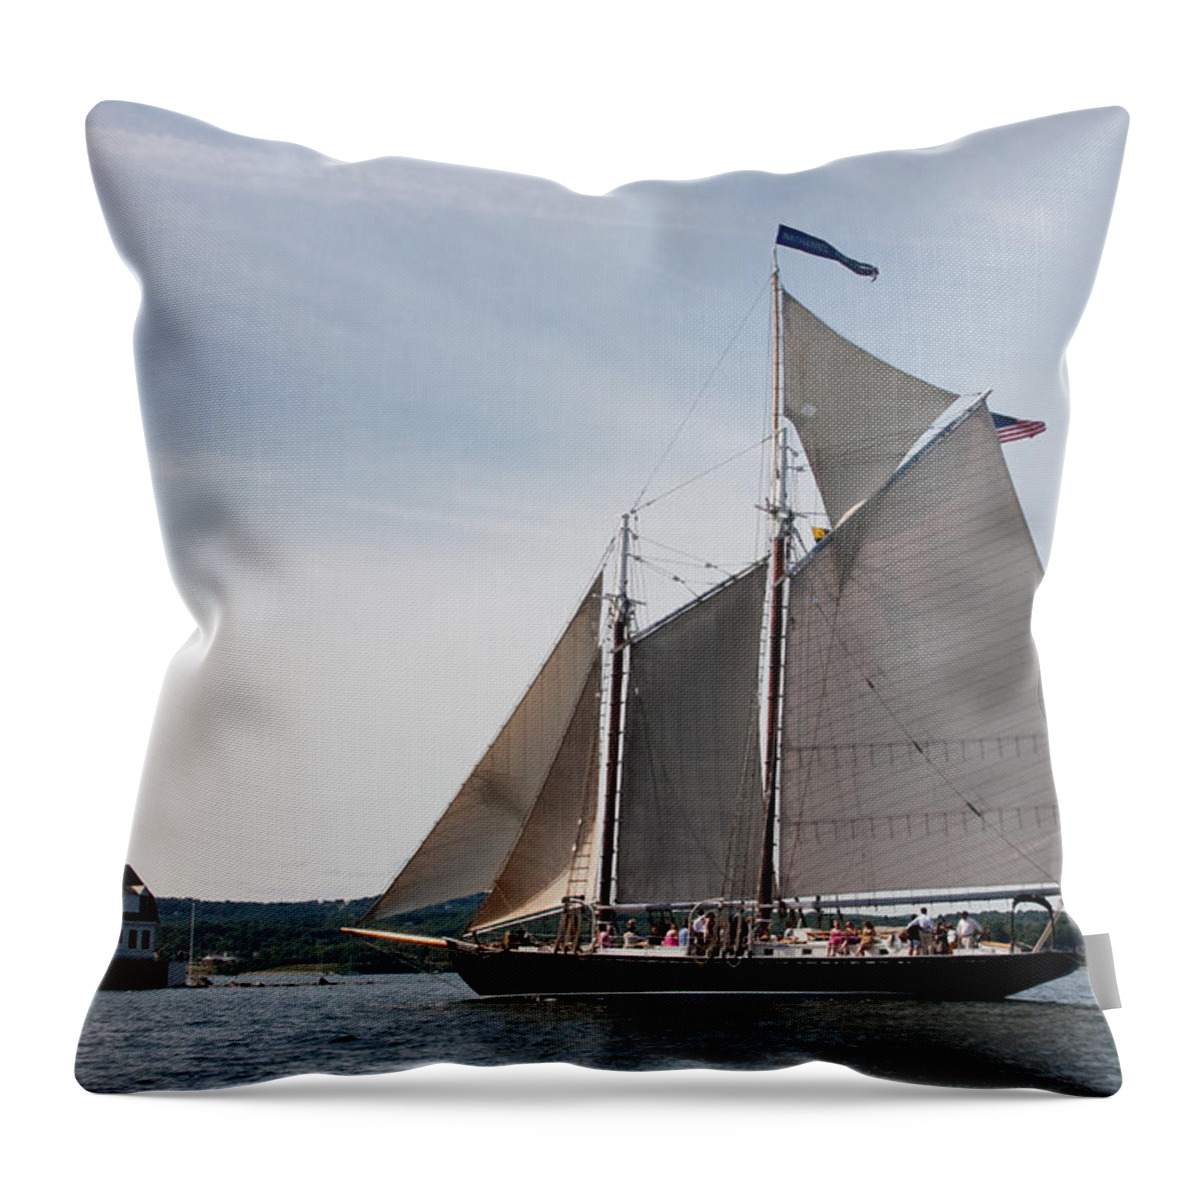 Sailboat Throw Pillow featuring the photograph Nathaniel Bowditch 4 by Brent L Ander